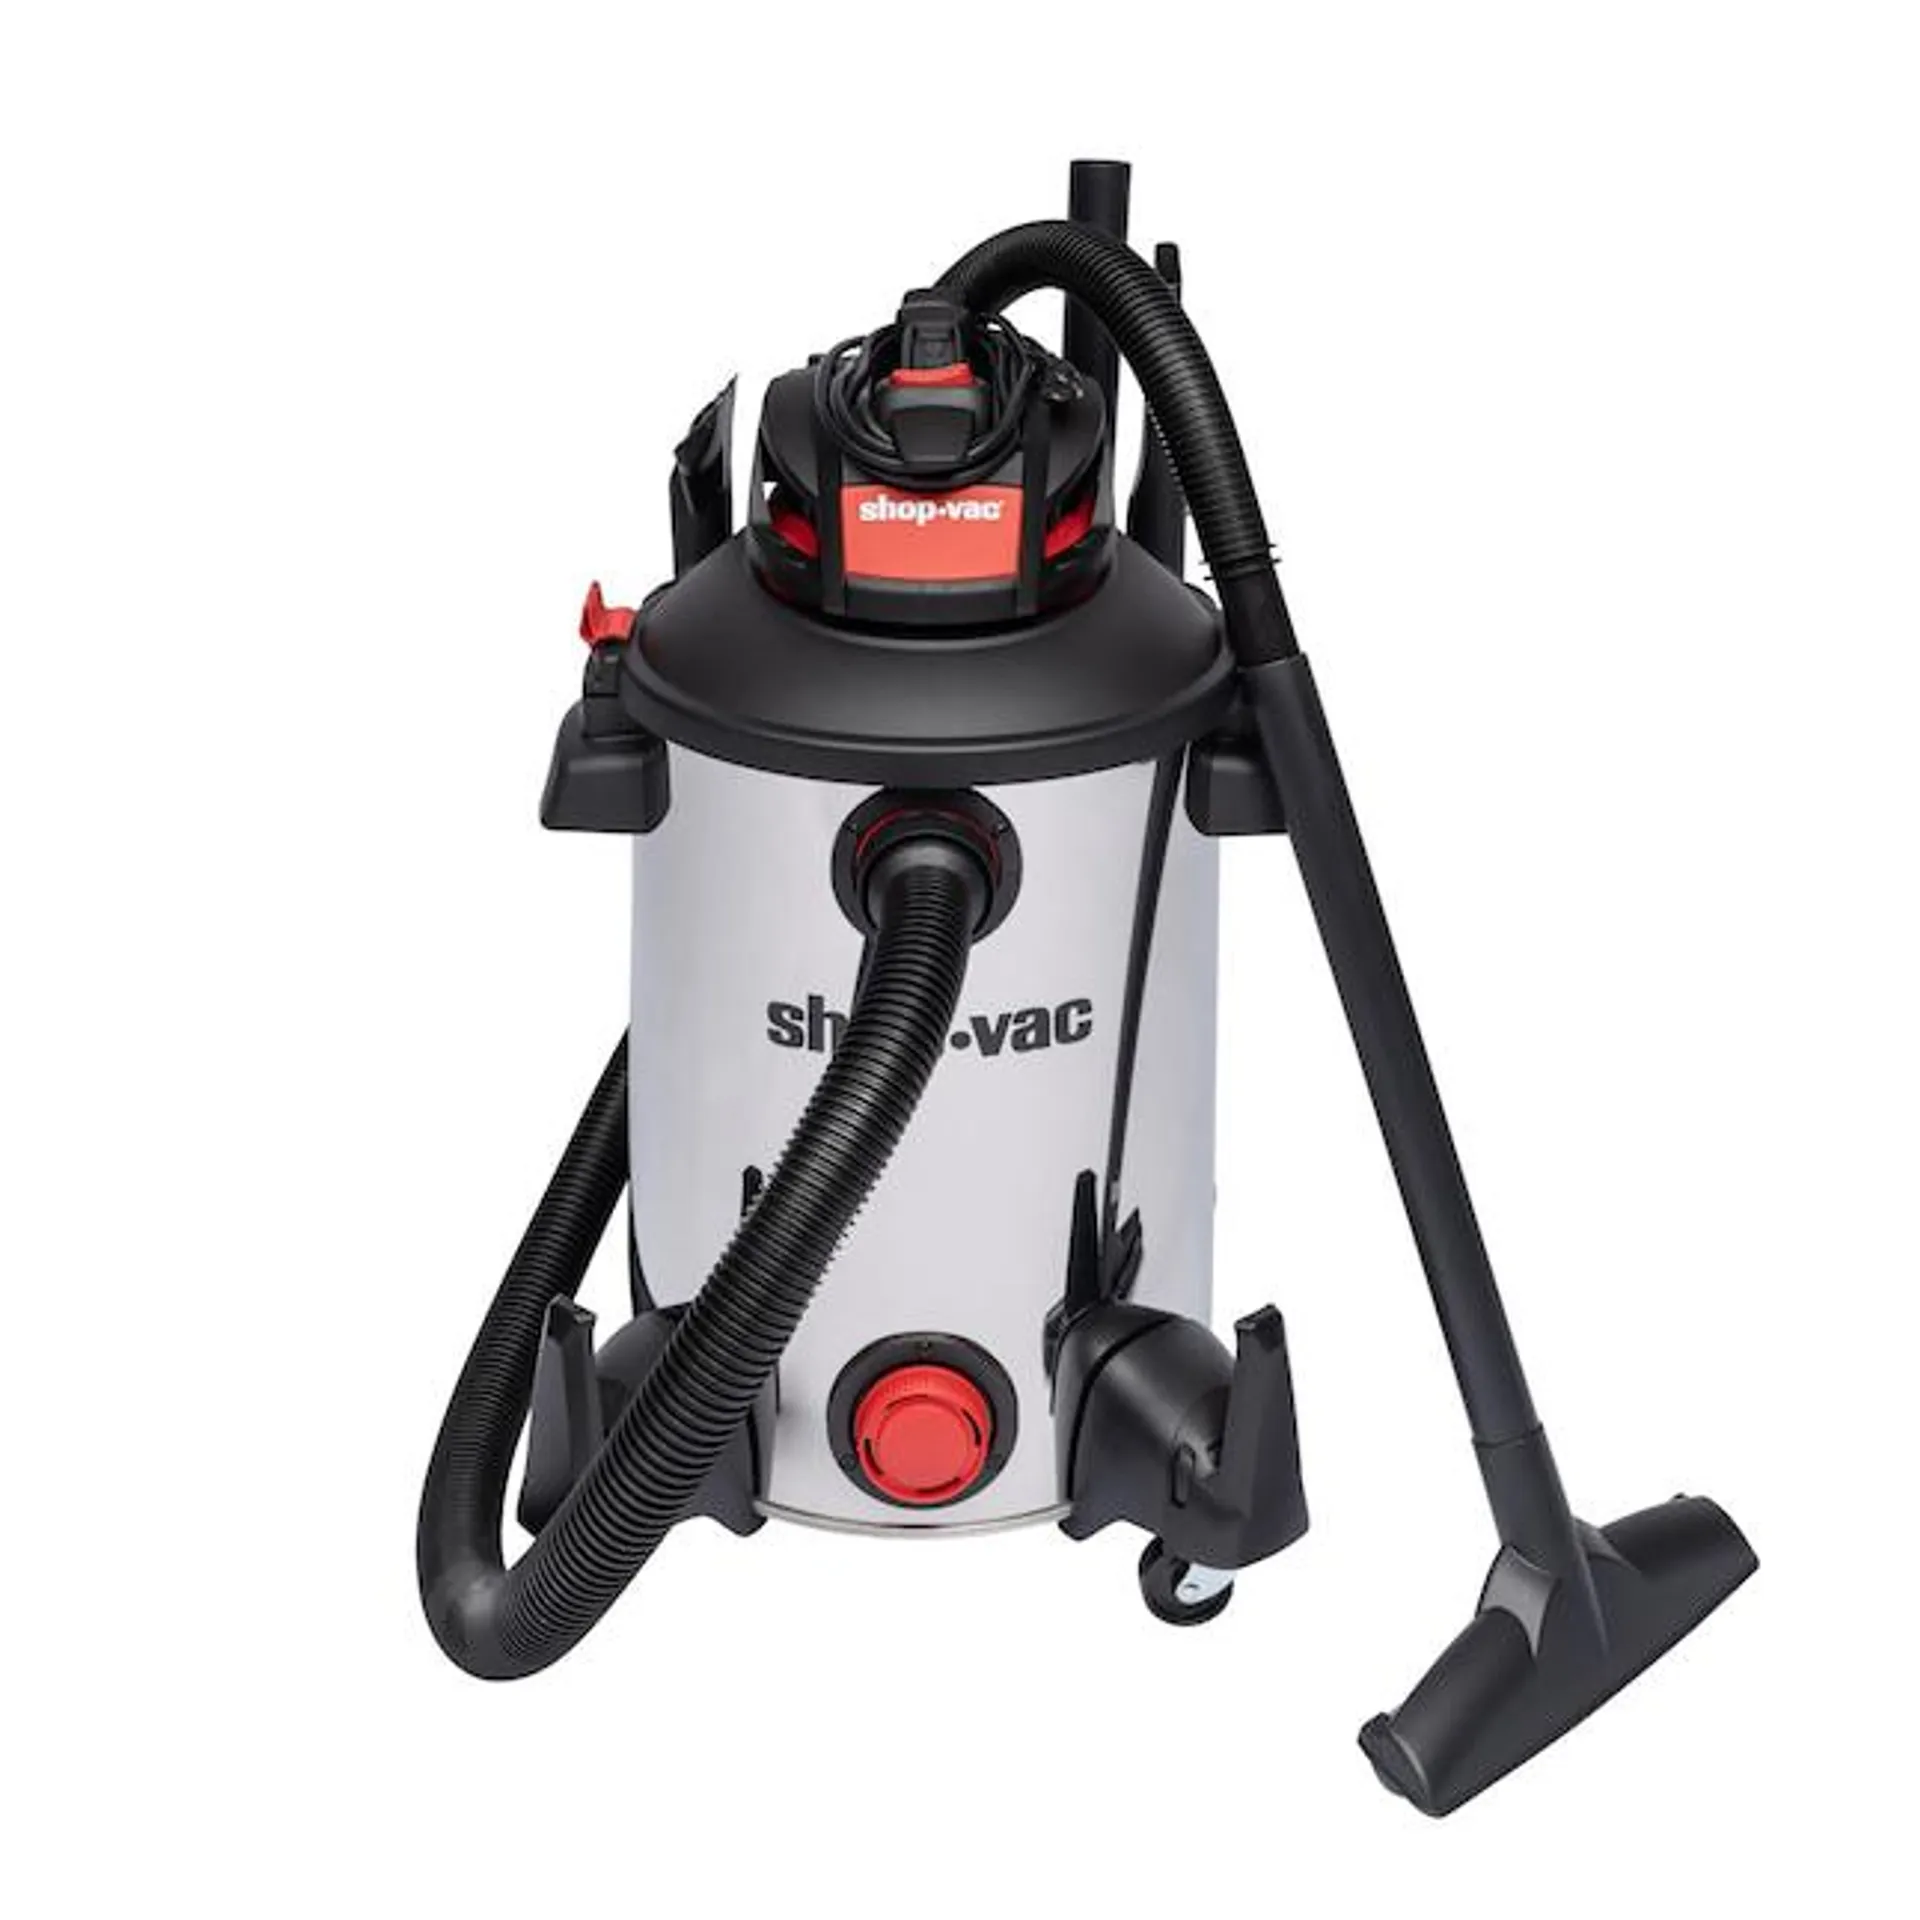 Shop-Vac 12-Gallons 6-HP Corded Wet/Dry Shop Vacuum with Accessories Included